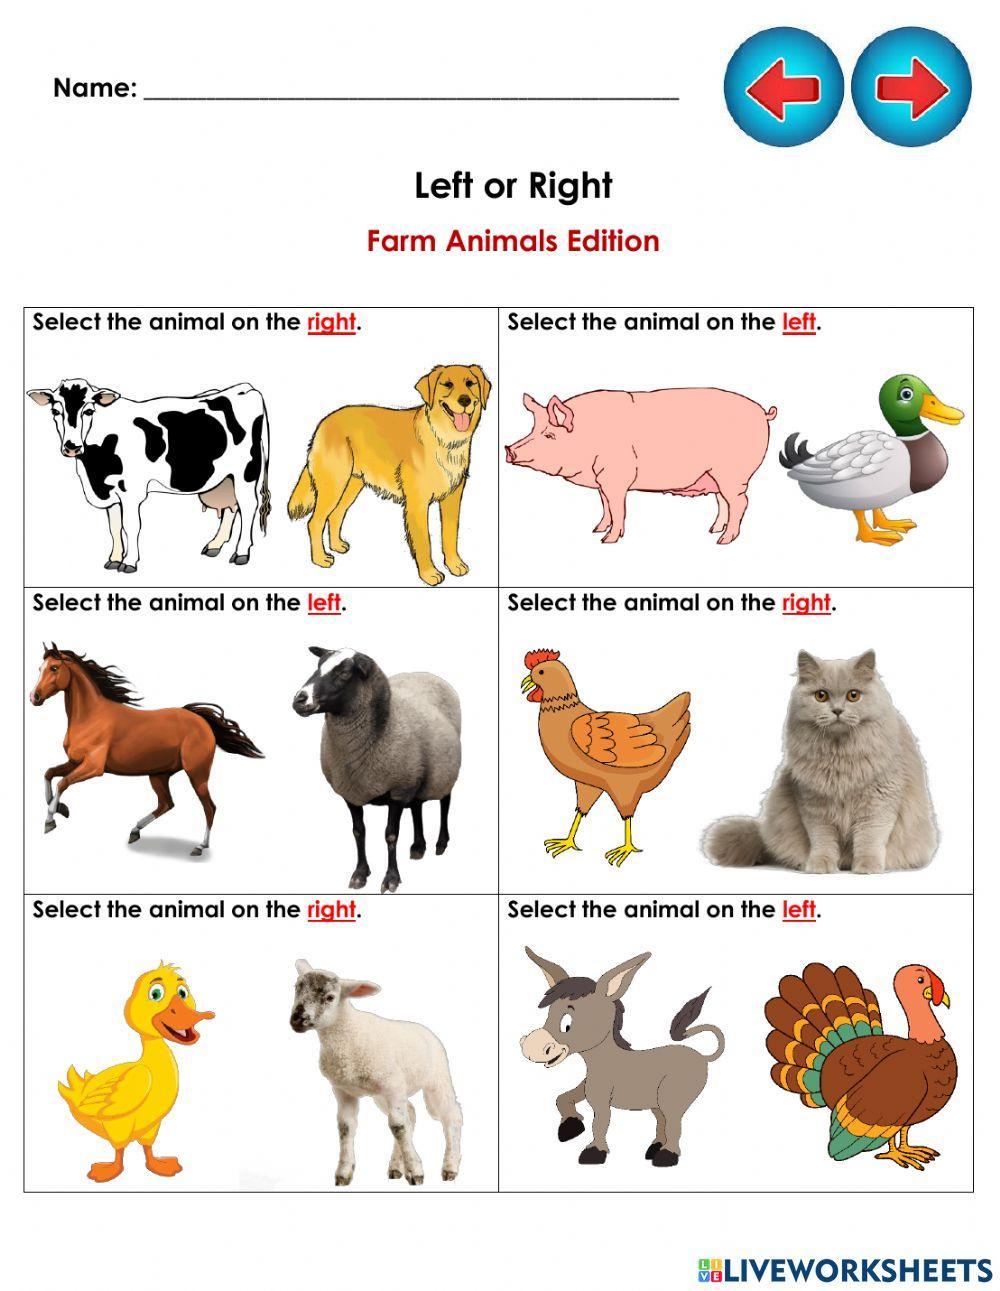 Maths Concepts: Left or Right